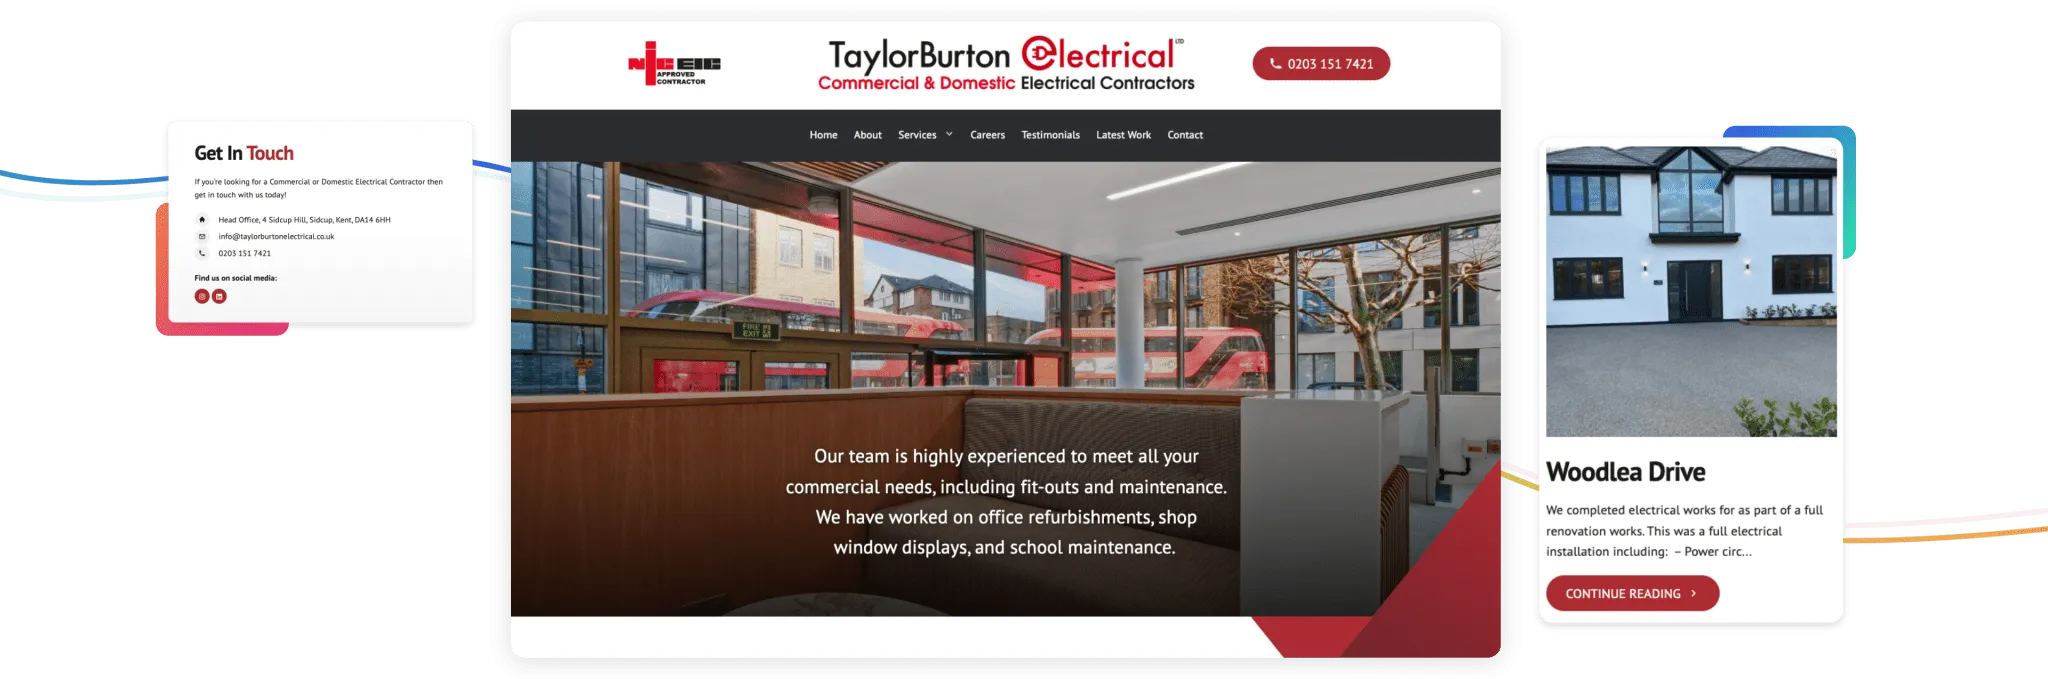 Screenshots showing sections of TaylorBurton website